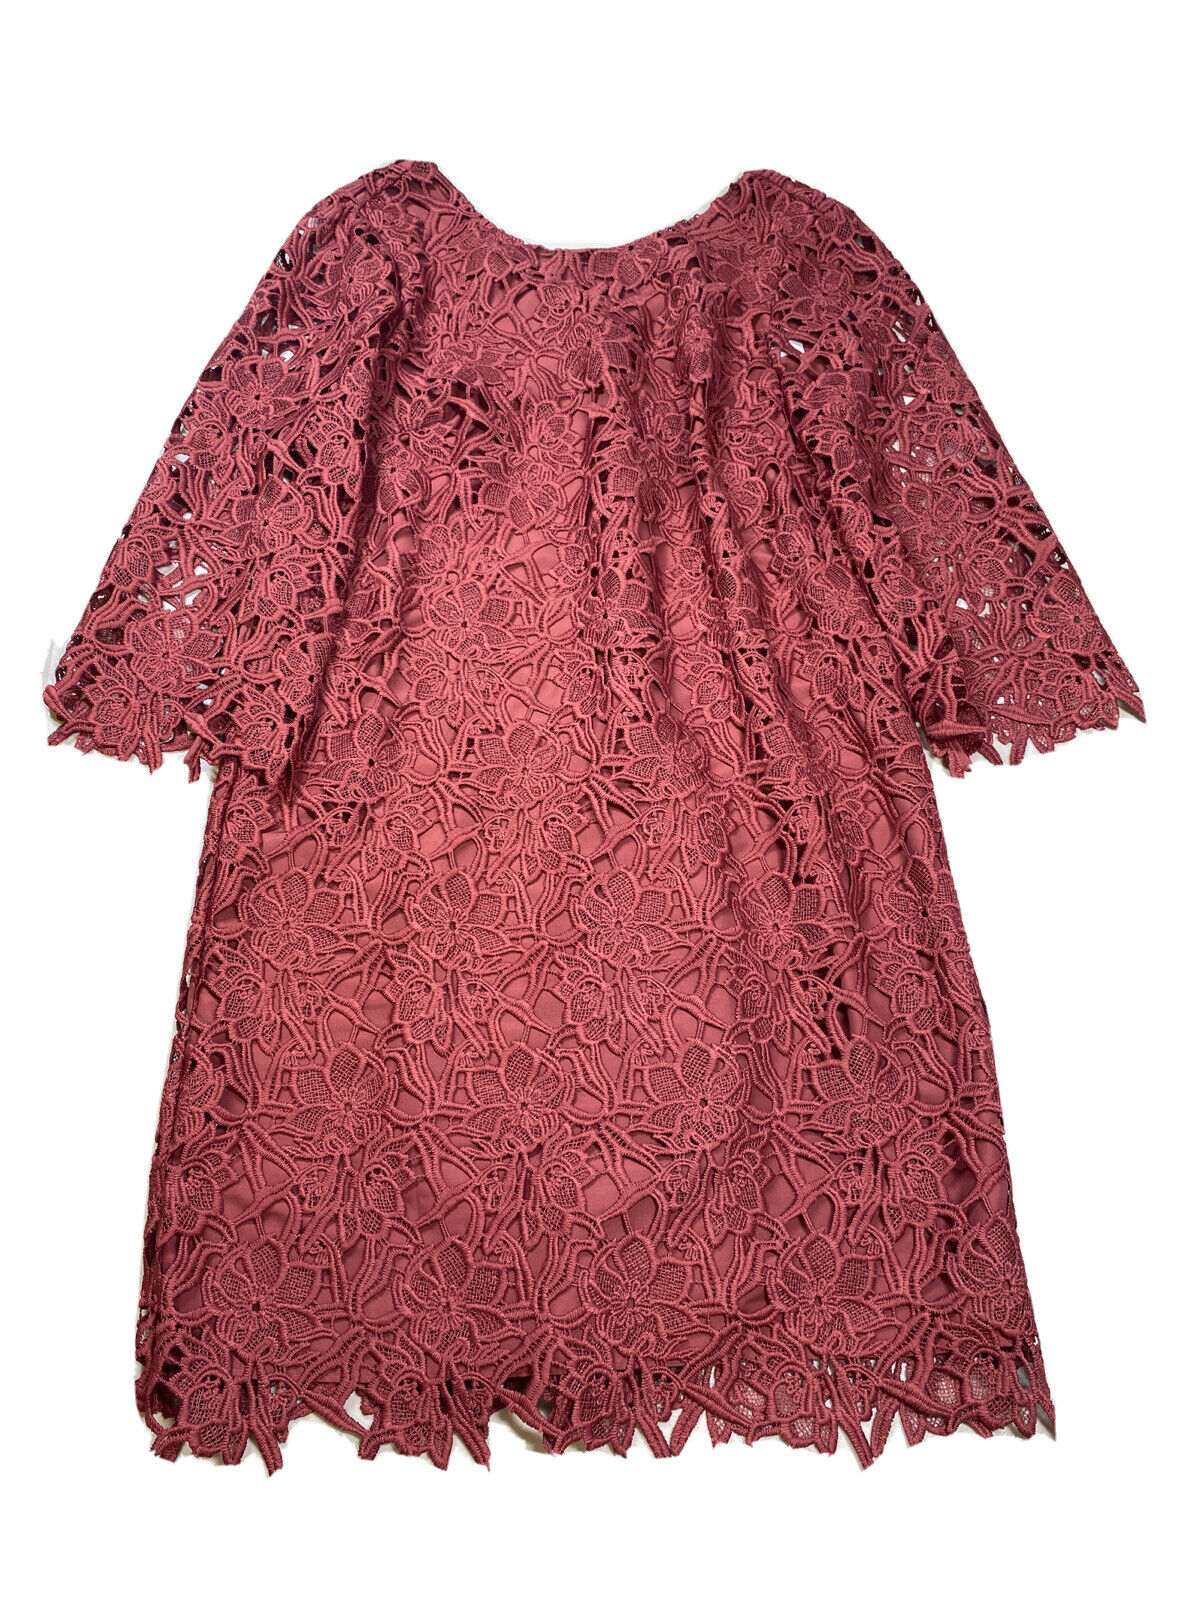 Ann Taylor Women's Pink Large Lace Lined 3/4 Sleeve Shift Dress - 6